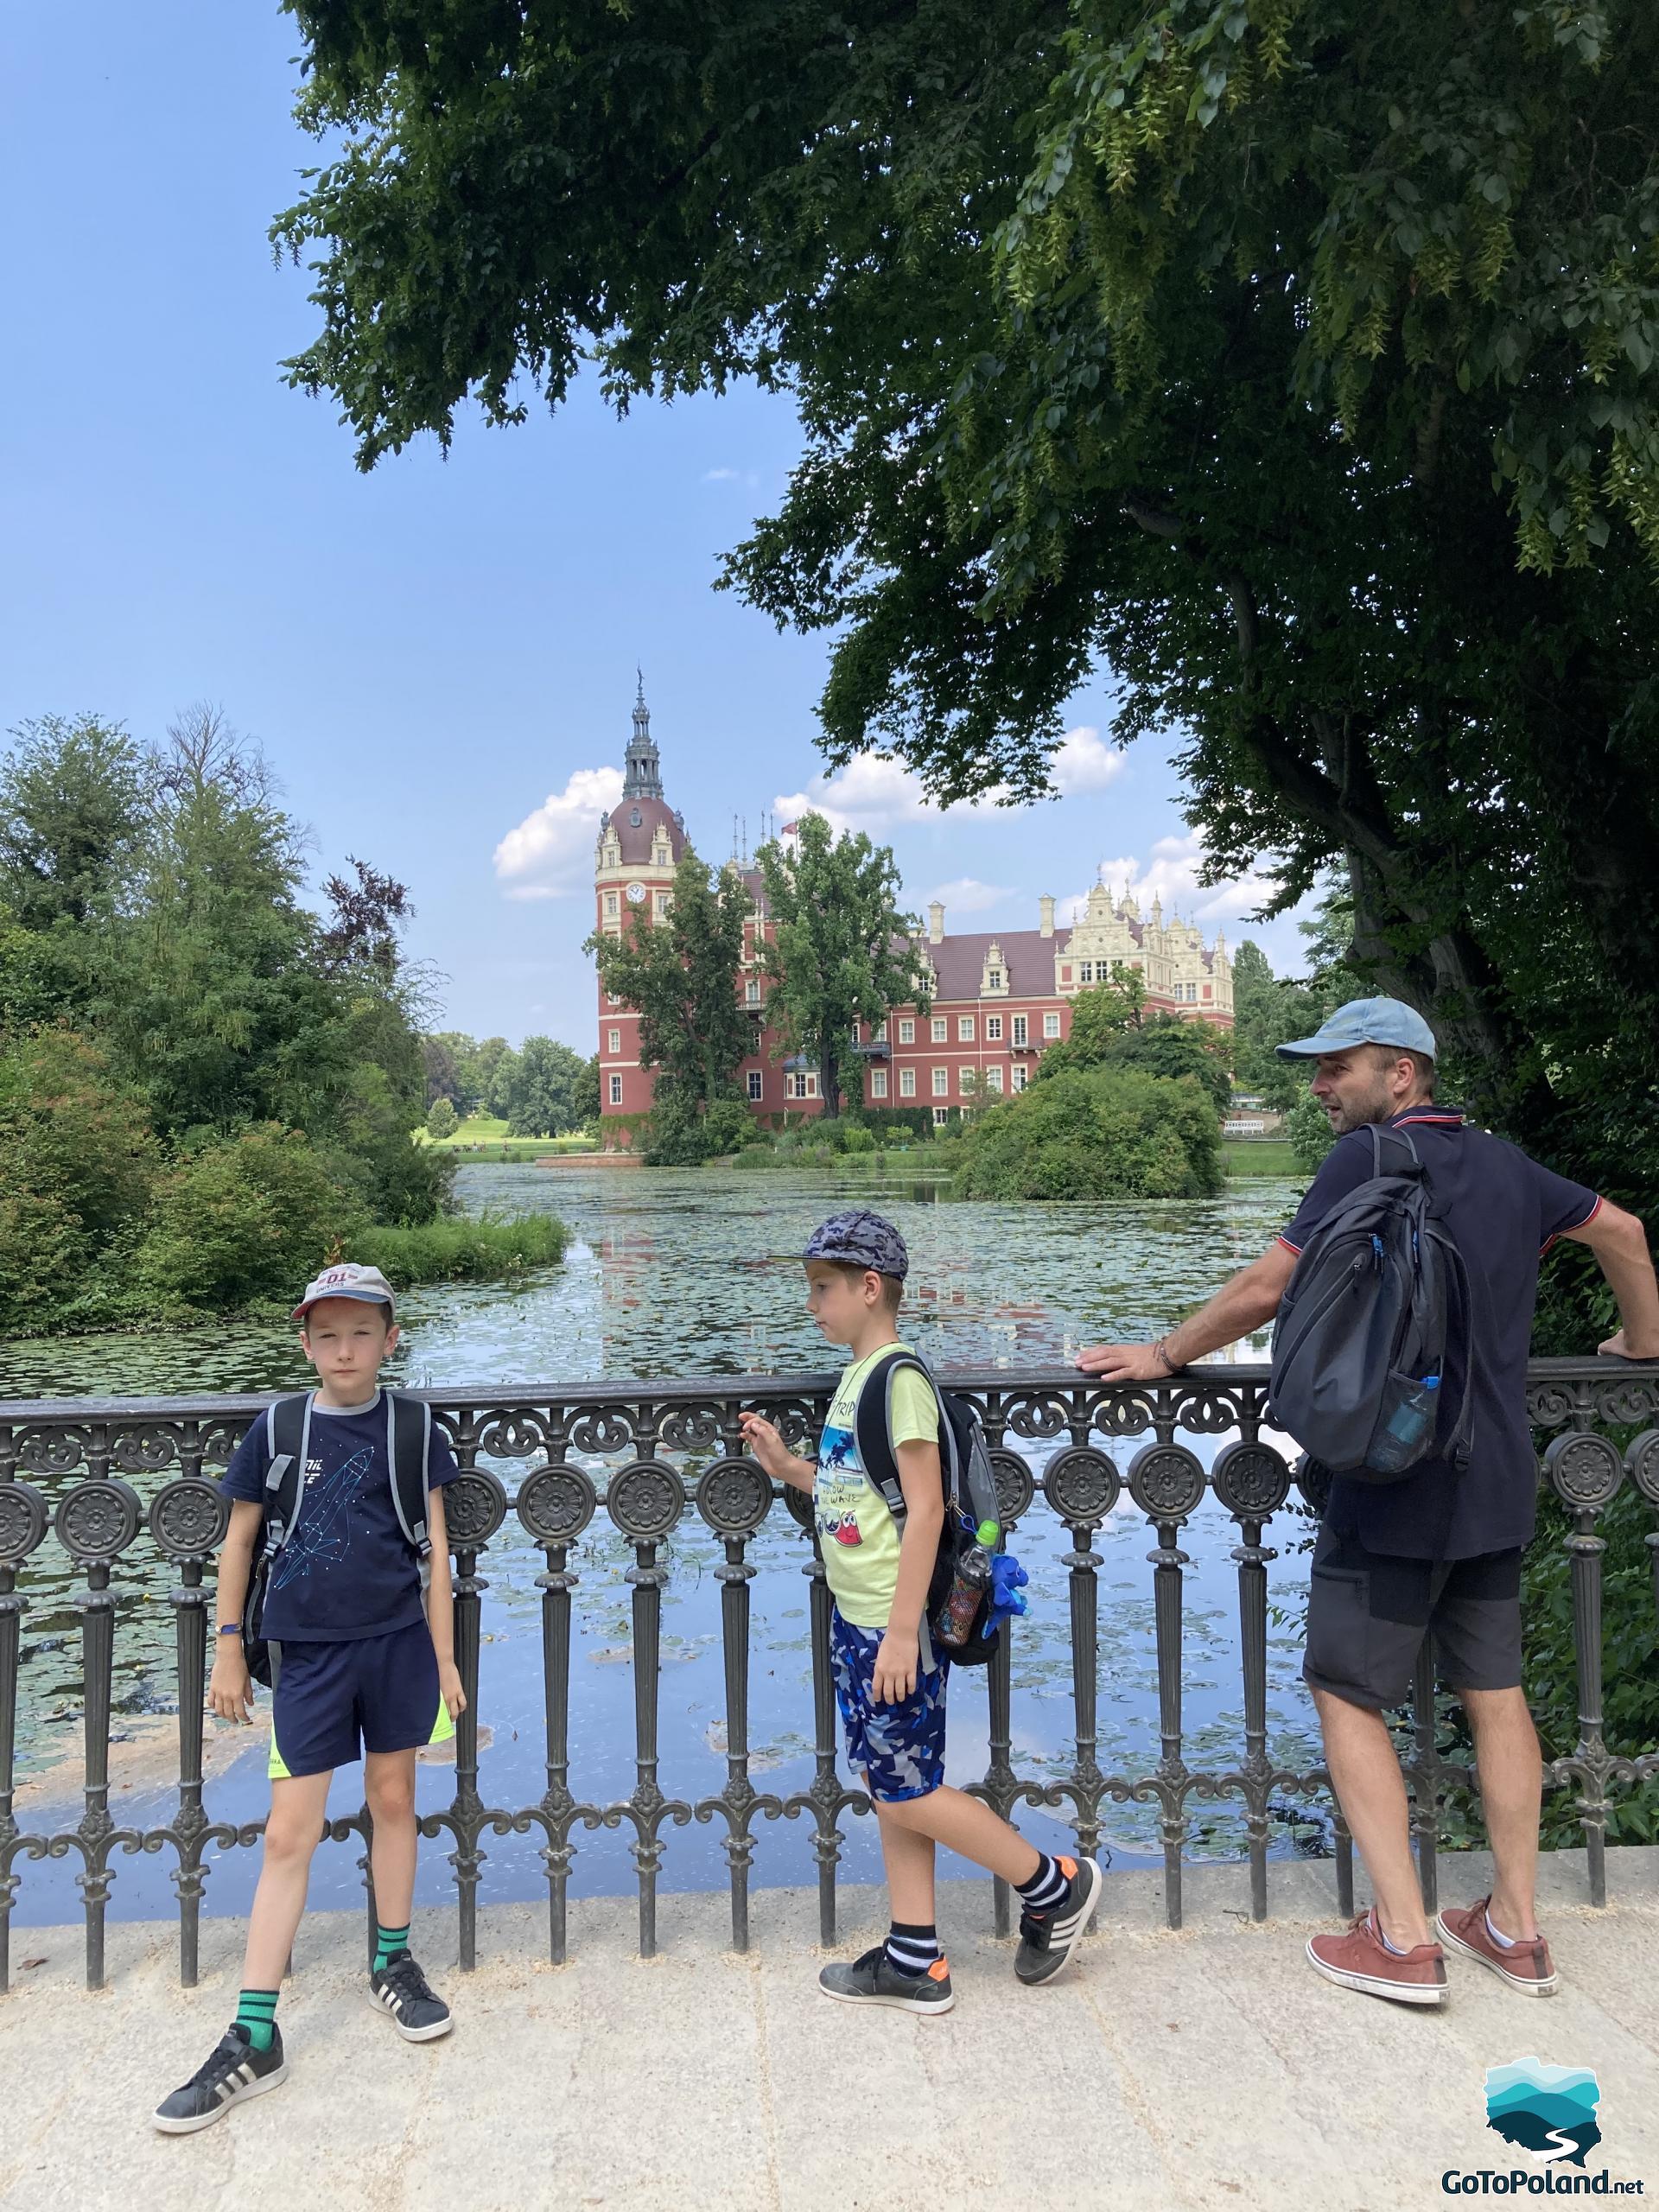 two boys and a man are standing on a small bridge, a pond and the castle are in the background